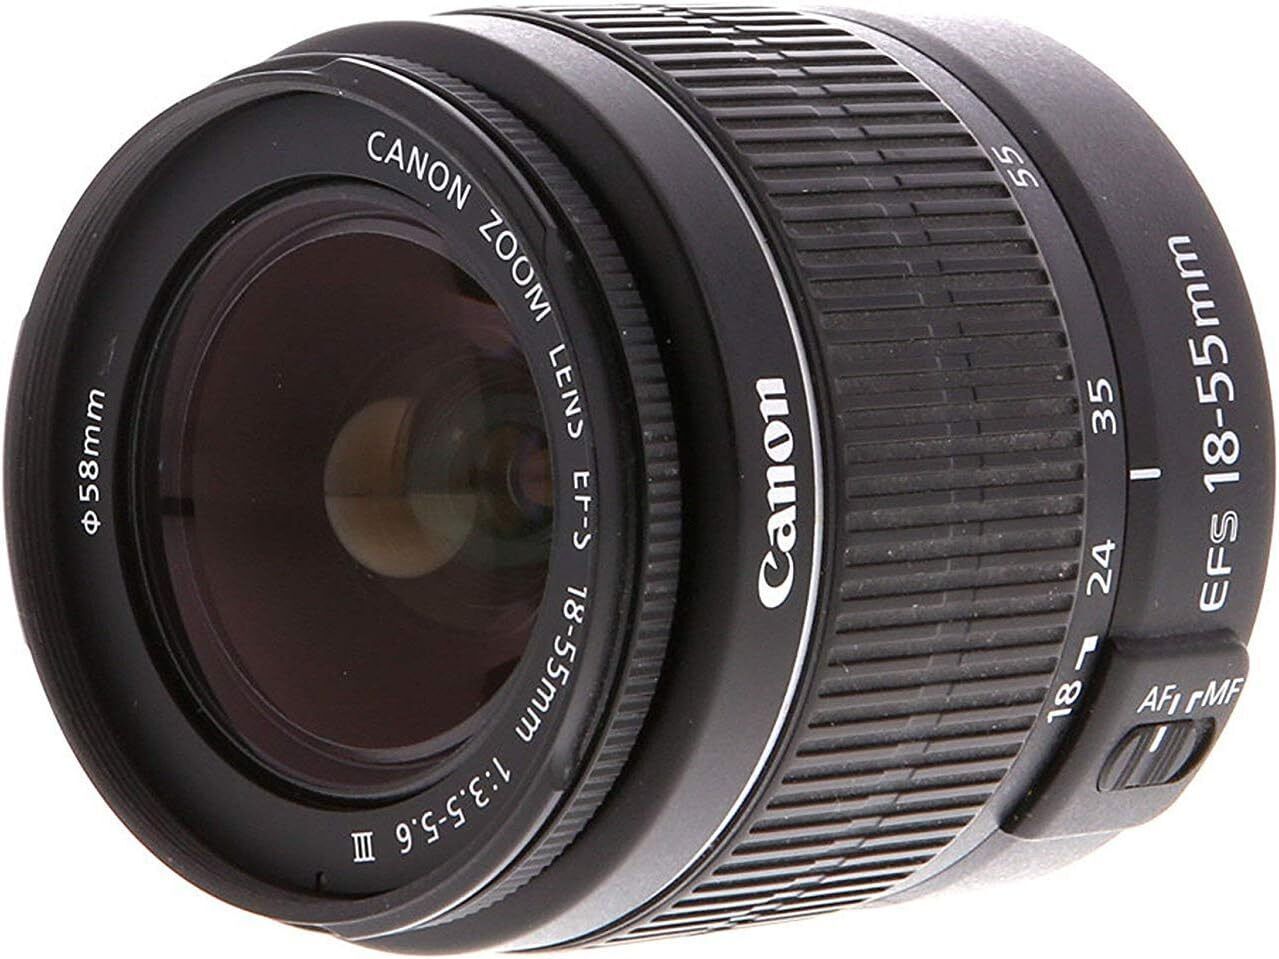 Canon EOS 2000D / Rebel T7 DSLR Camera with 18-55mm Lens  + Creative Kit